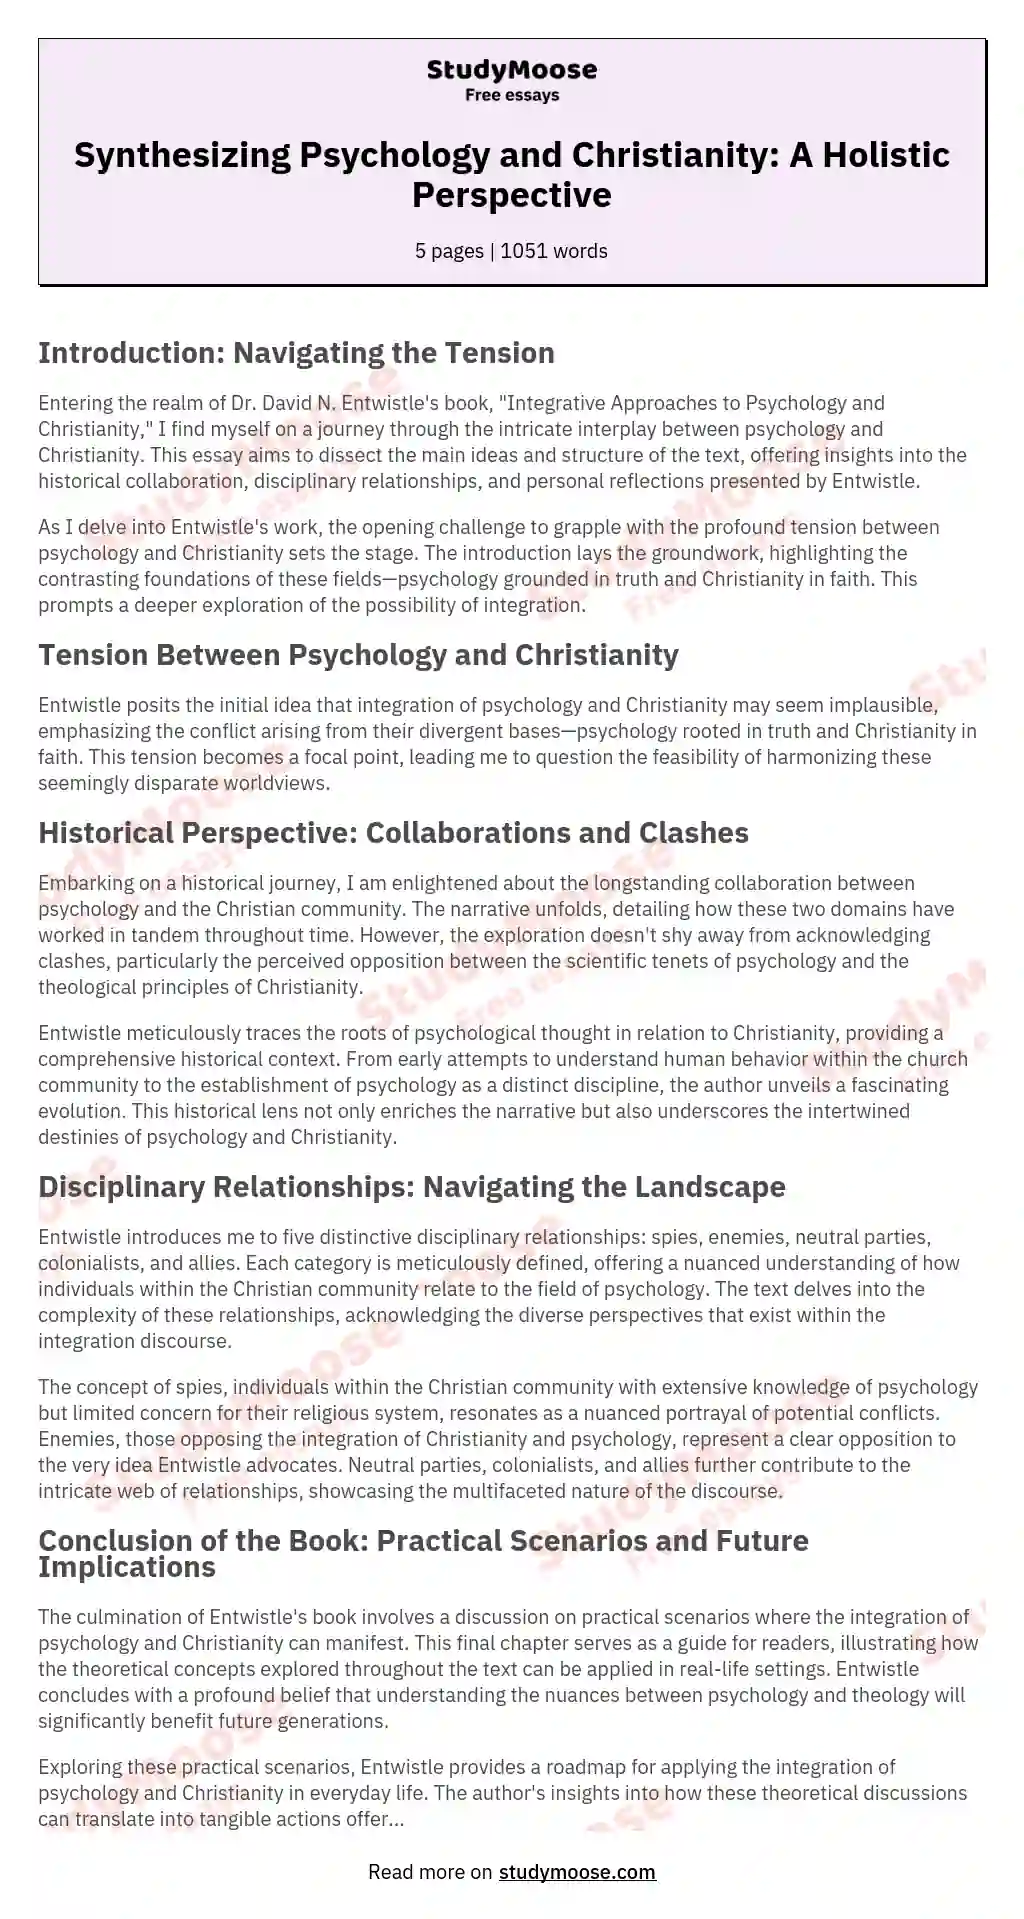 Synthesizing Psychology and Christianity: A Holistic Perspective essay